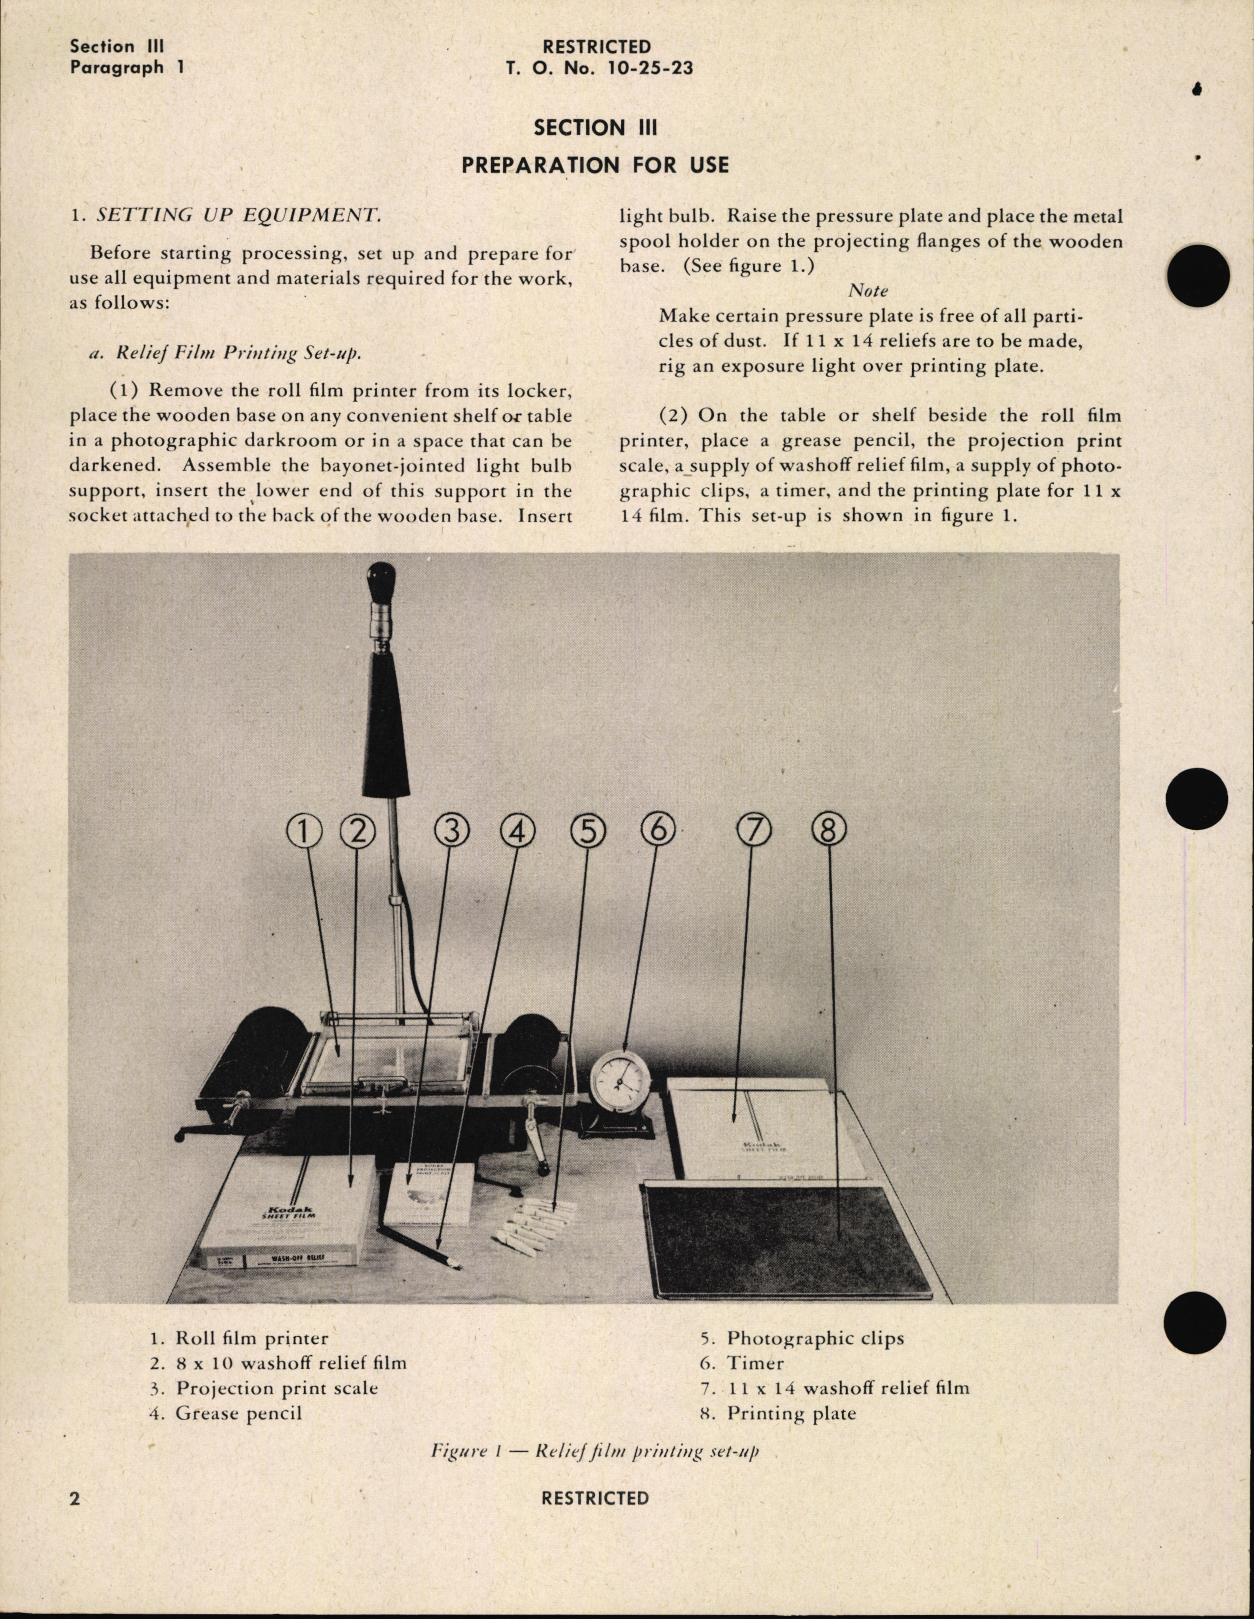 Sample page 6 from AirCorps Library document: Handbook of Instructions with Parts Catalog for Vectograph Kits Polaroid